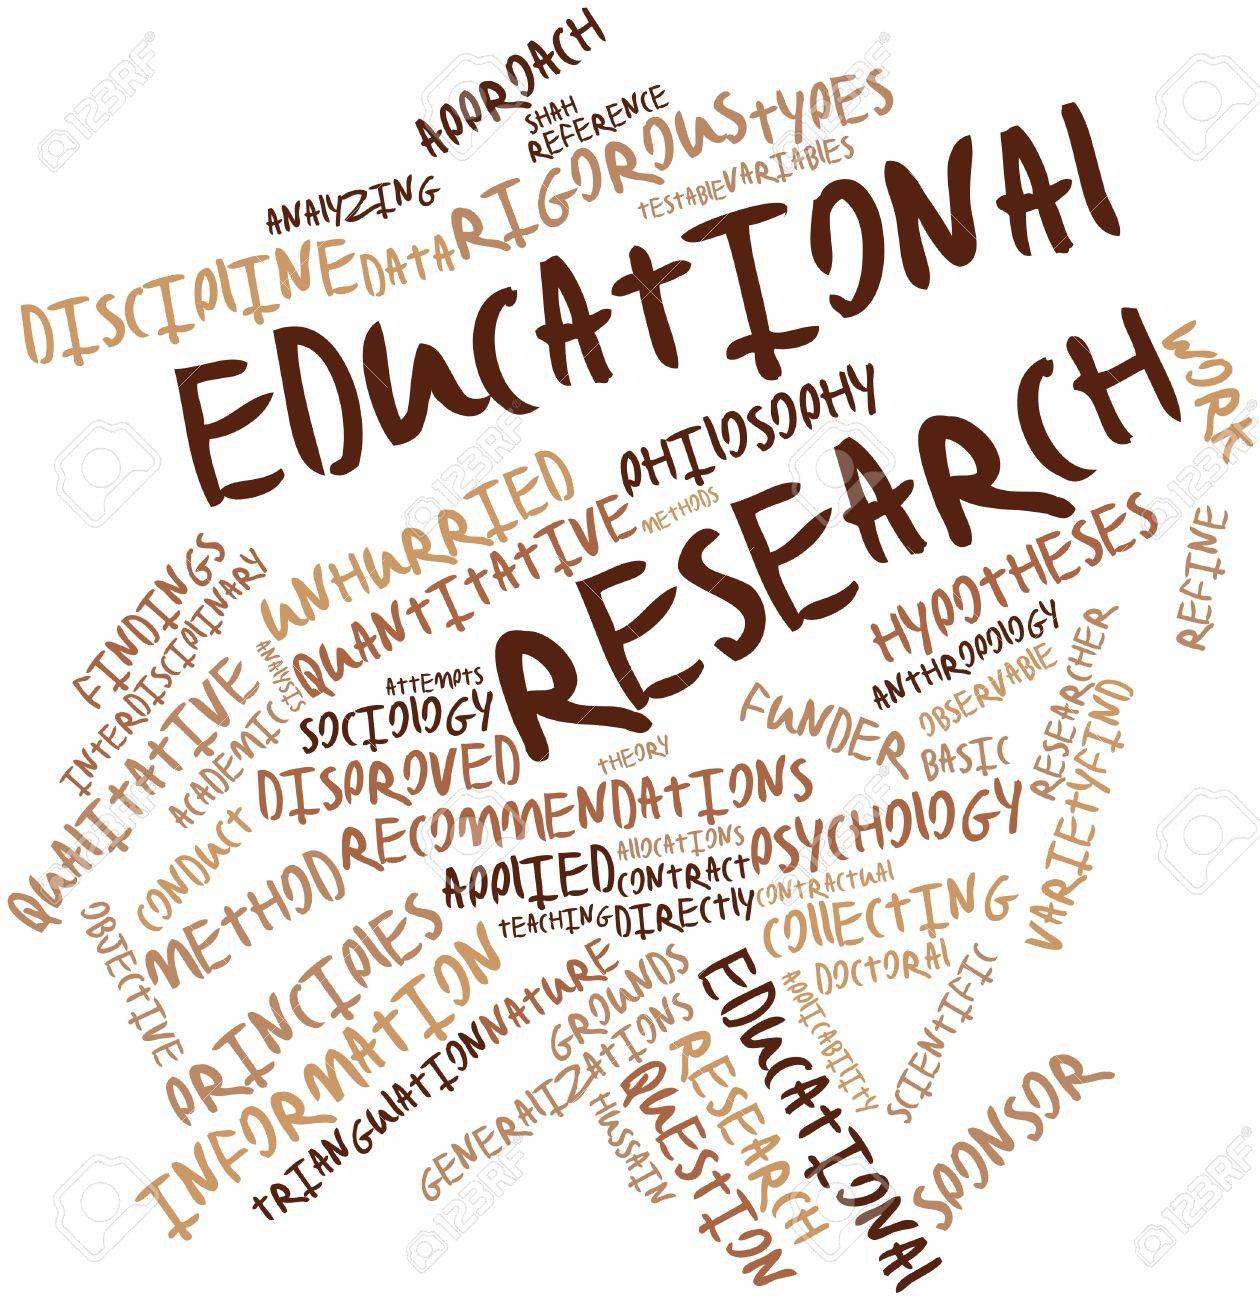 education management research topics